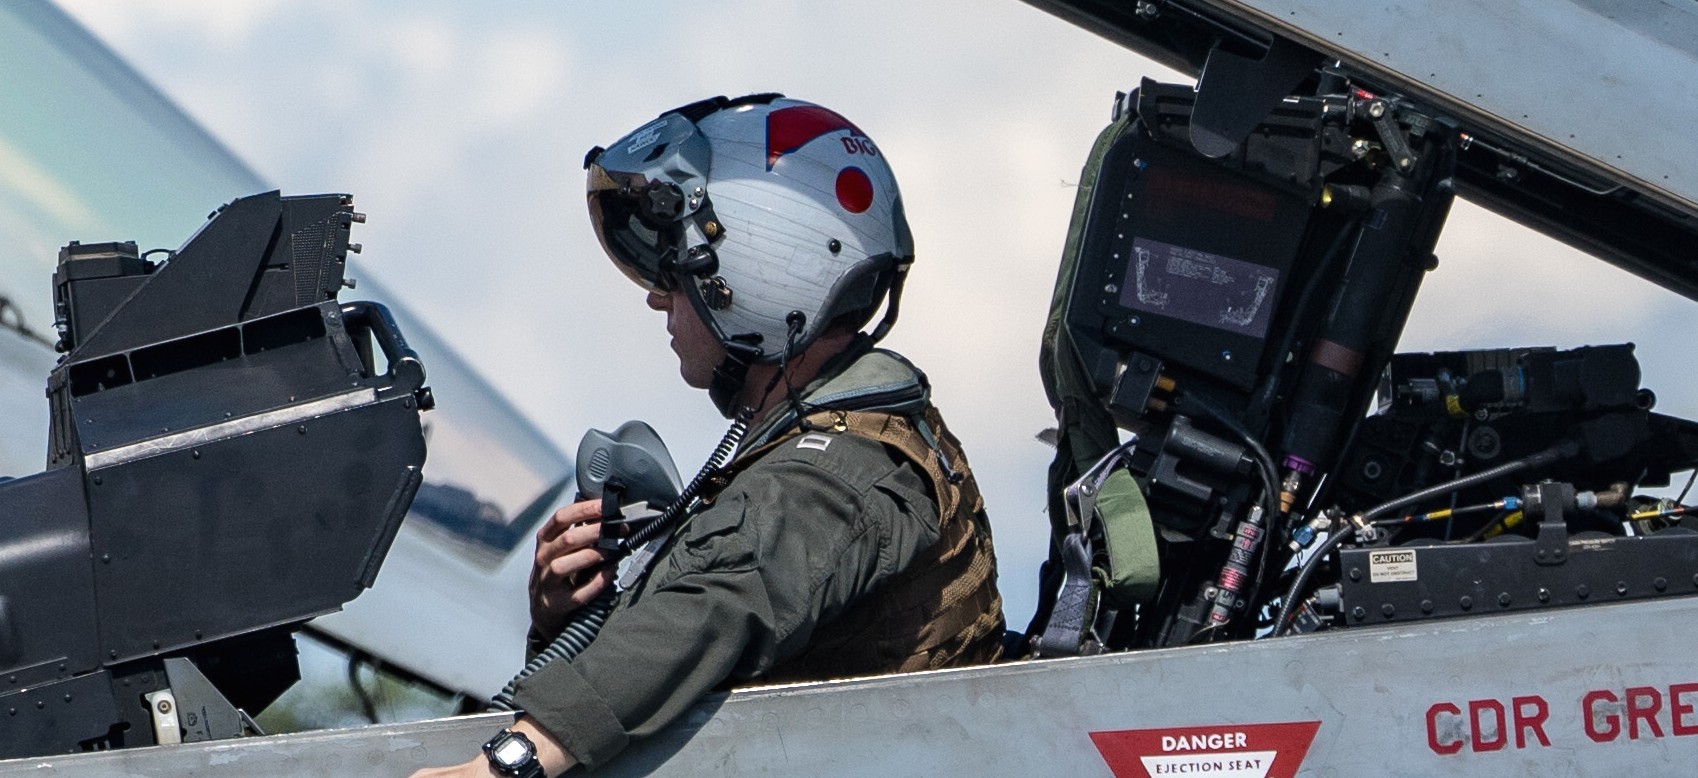 vfa-11 red rippers strike fighter squadron us navy f/a-18f super hornet cockpit view 123b